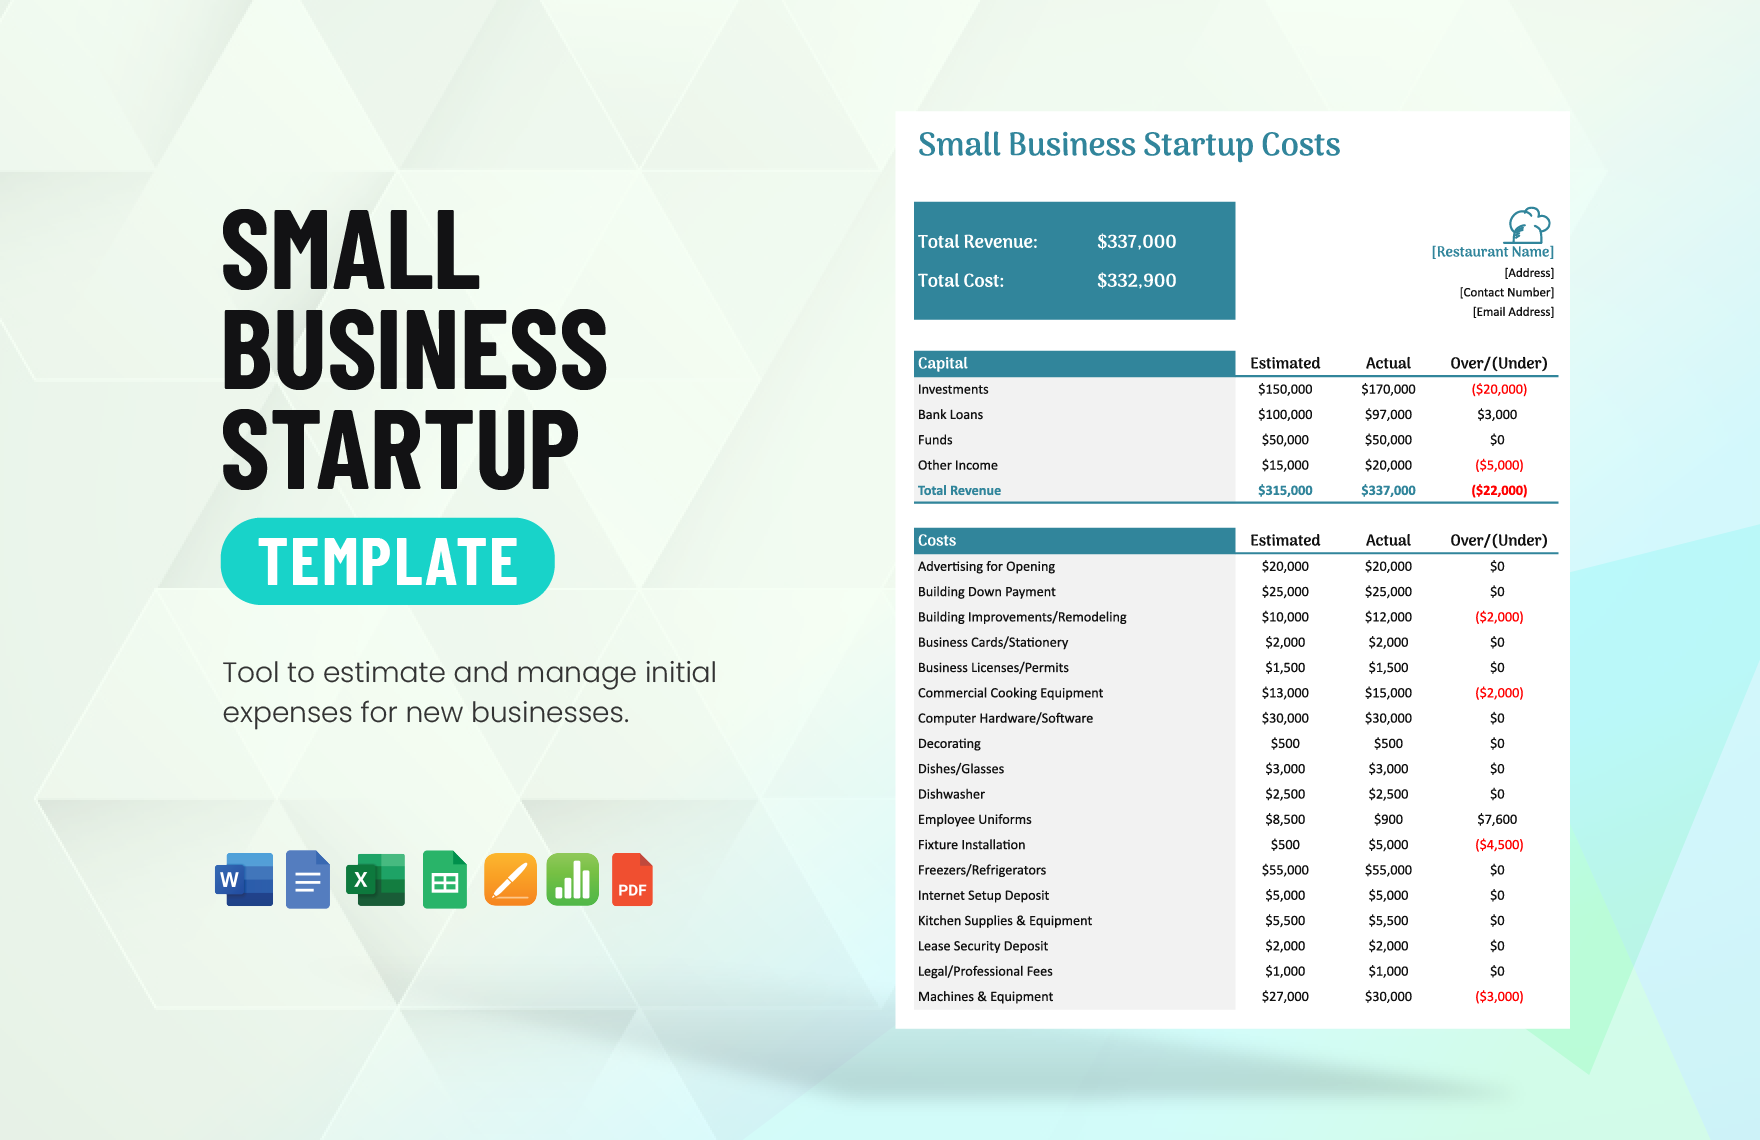 Small Business Start Up Costs Template